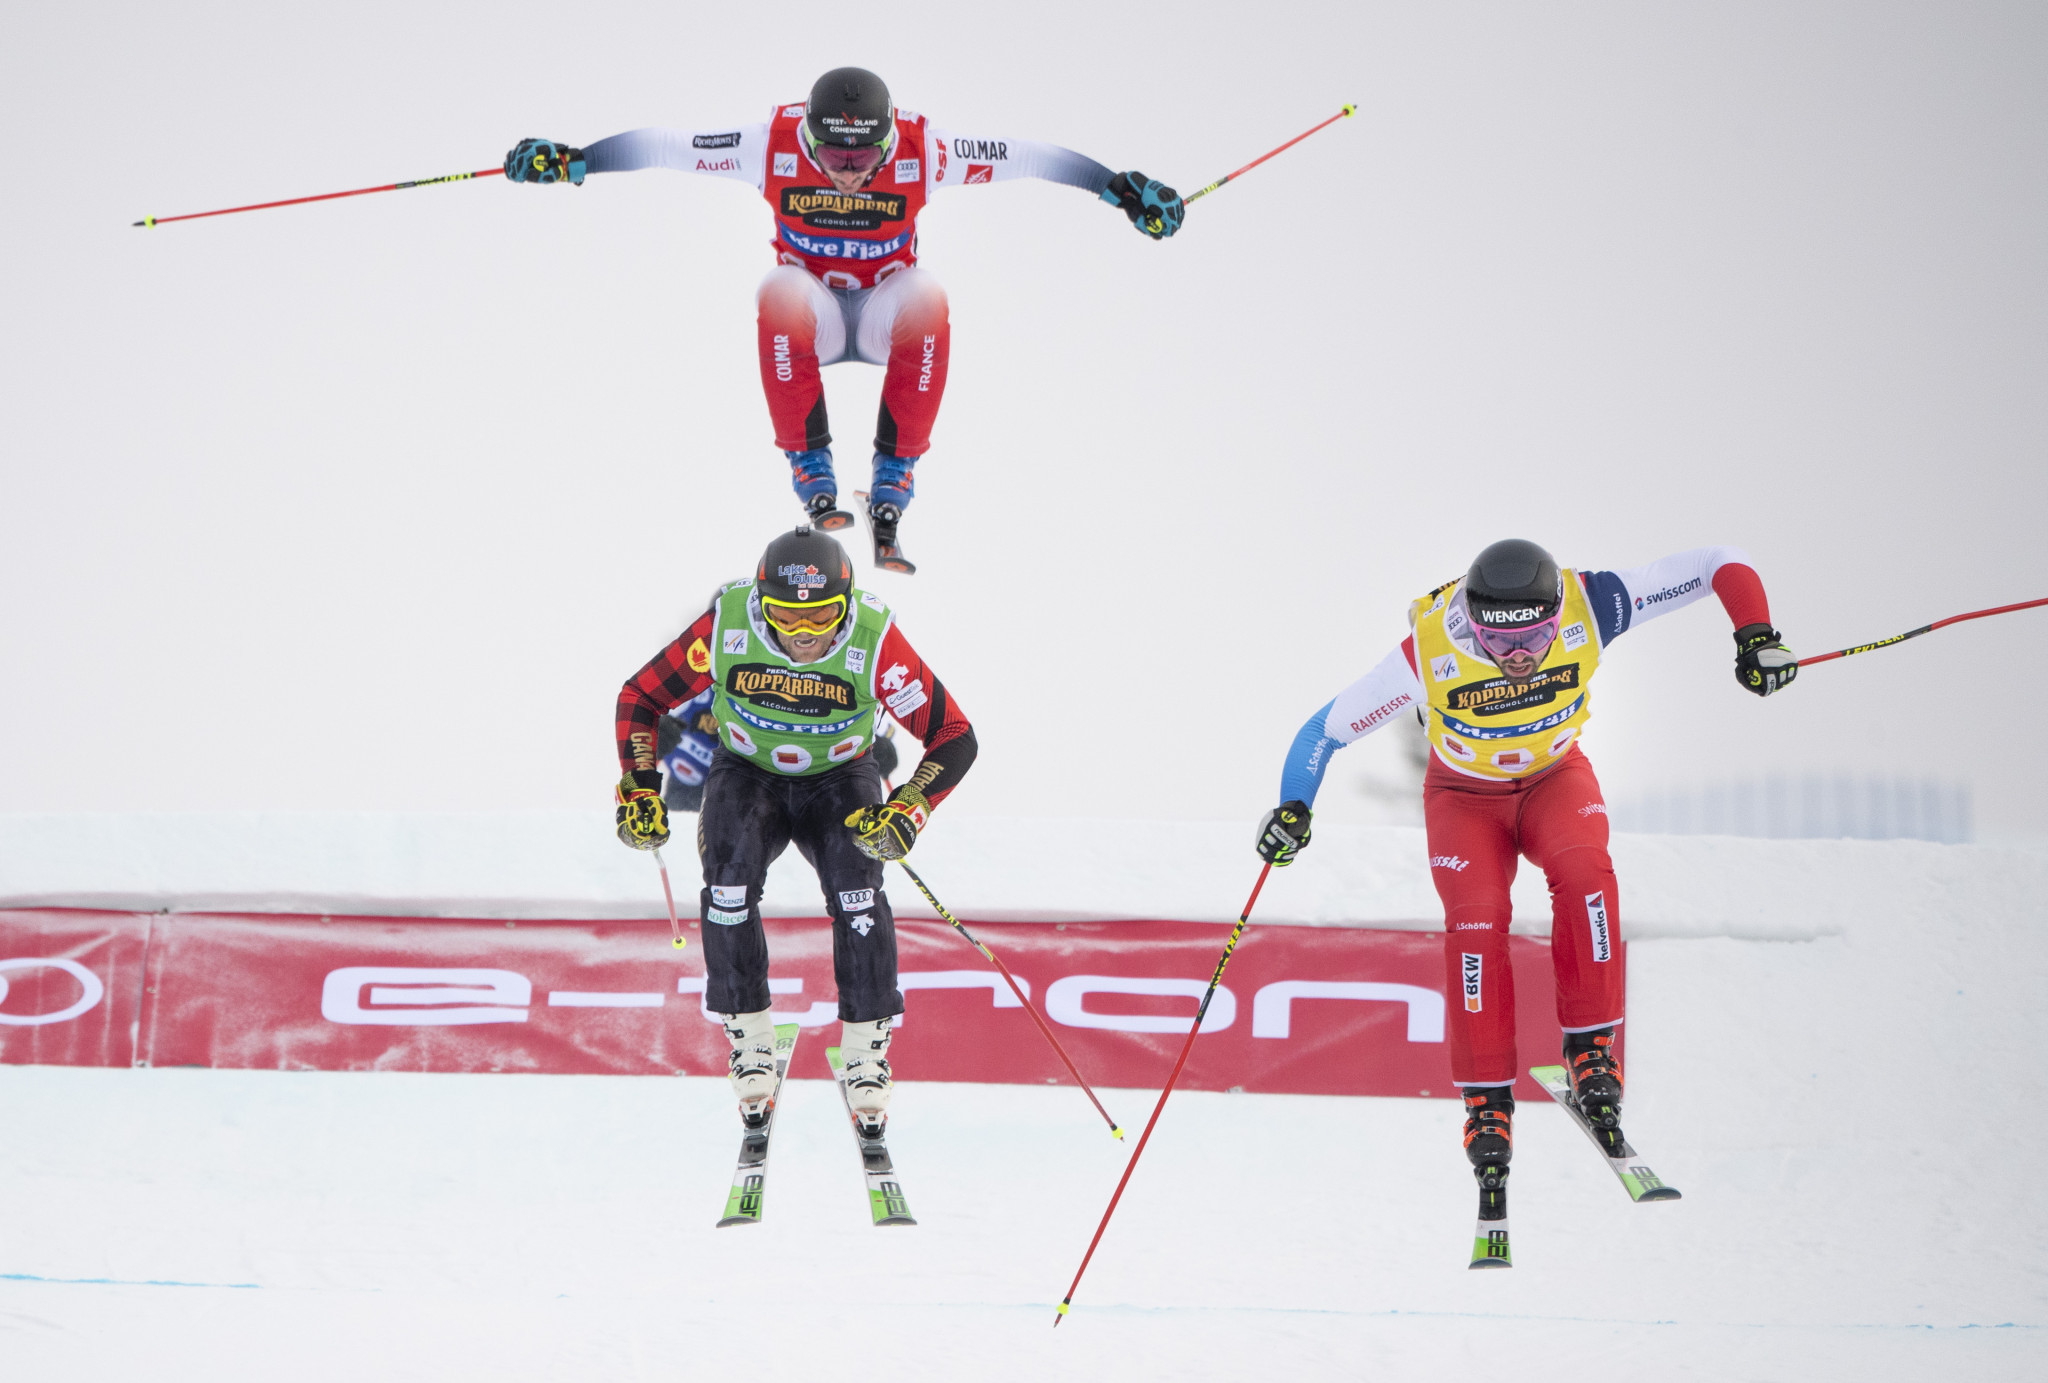 Ryan Regez of Switzerland, yellow, overtakes Brady Leman of Canada, green, in the final jump ©Getty Images